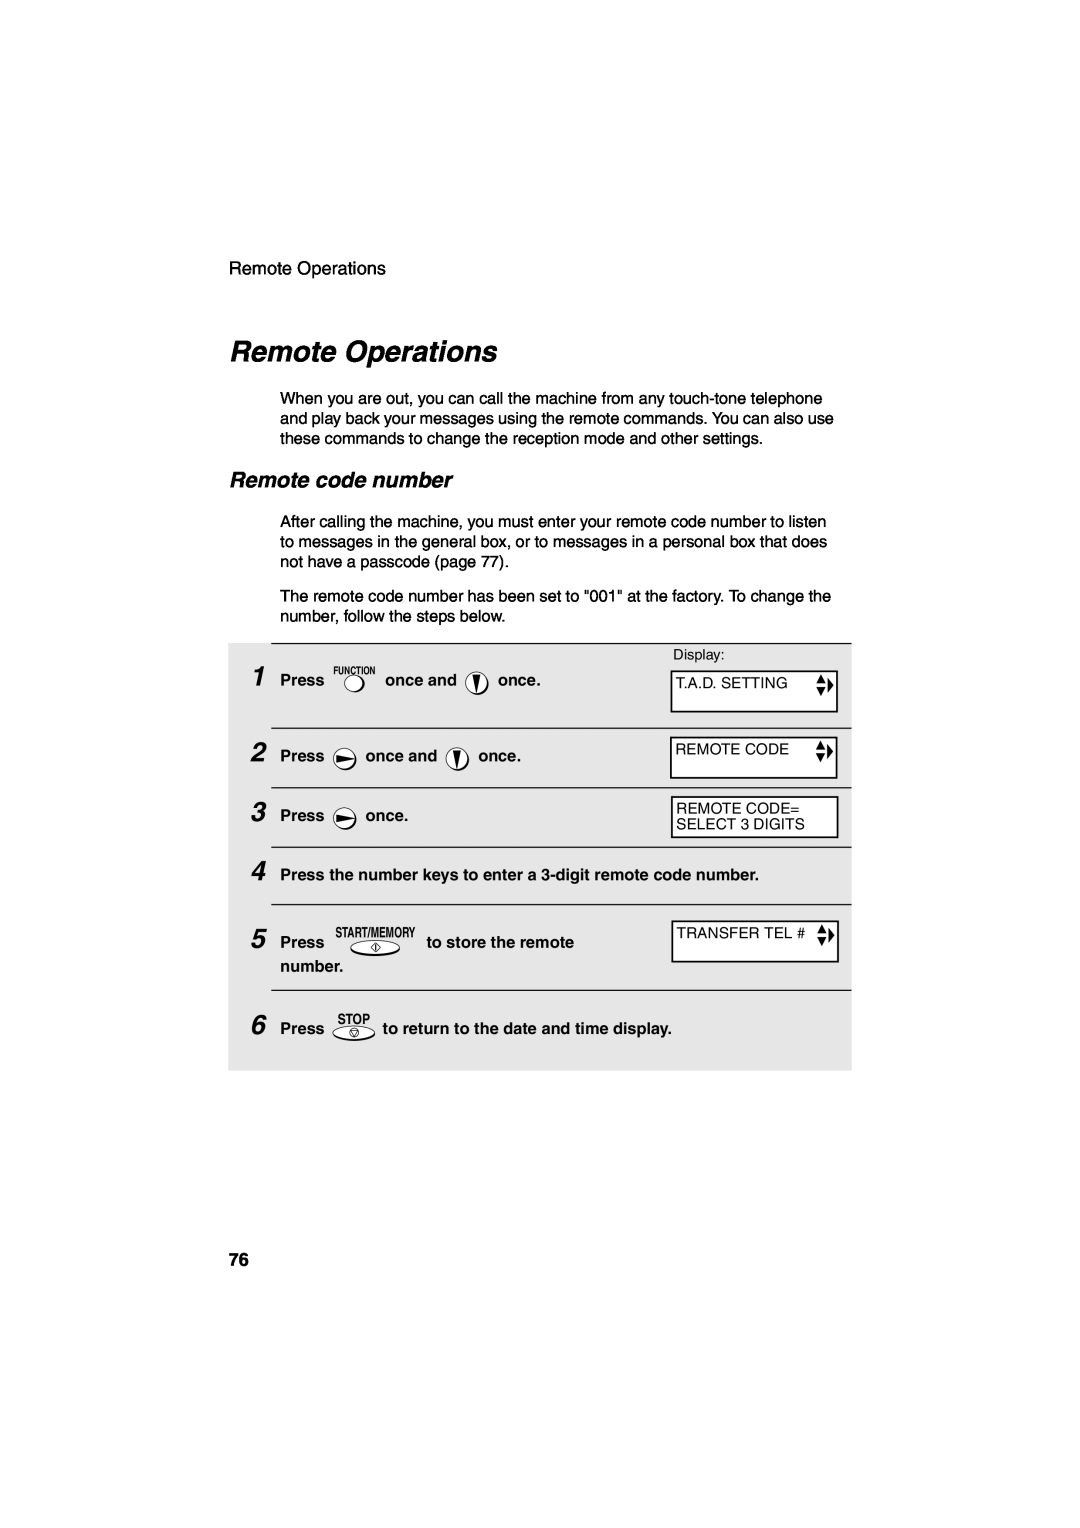 Sharp UX-CD600 operation manual Remote Operations, Remote code number 